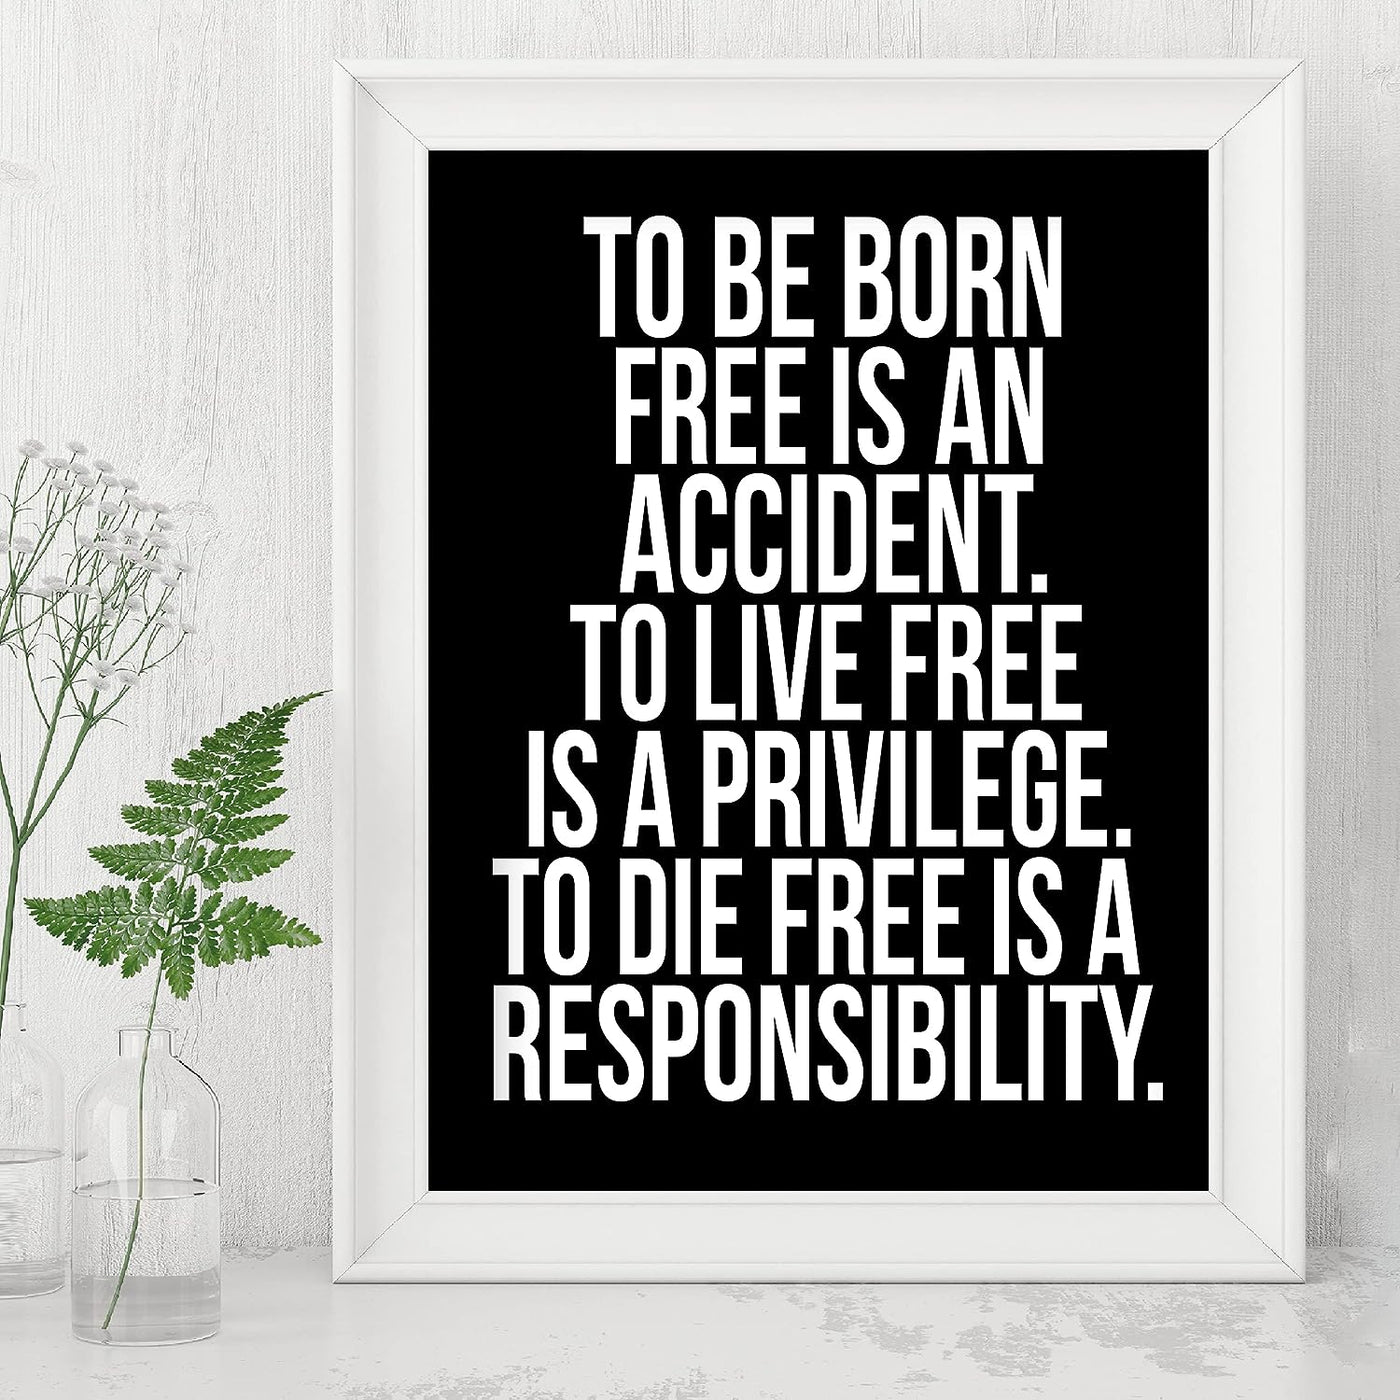 To Live Free Is a Privilege-Patriotic Wall Decor -8 x 10" Motivational Art Print-Ready to Frame. Pro-American Decor for Home-Office-Garage-Bar-Cave. Great Gift & Reminder of Liberty & Freedom!